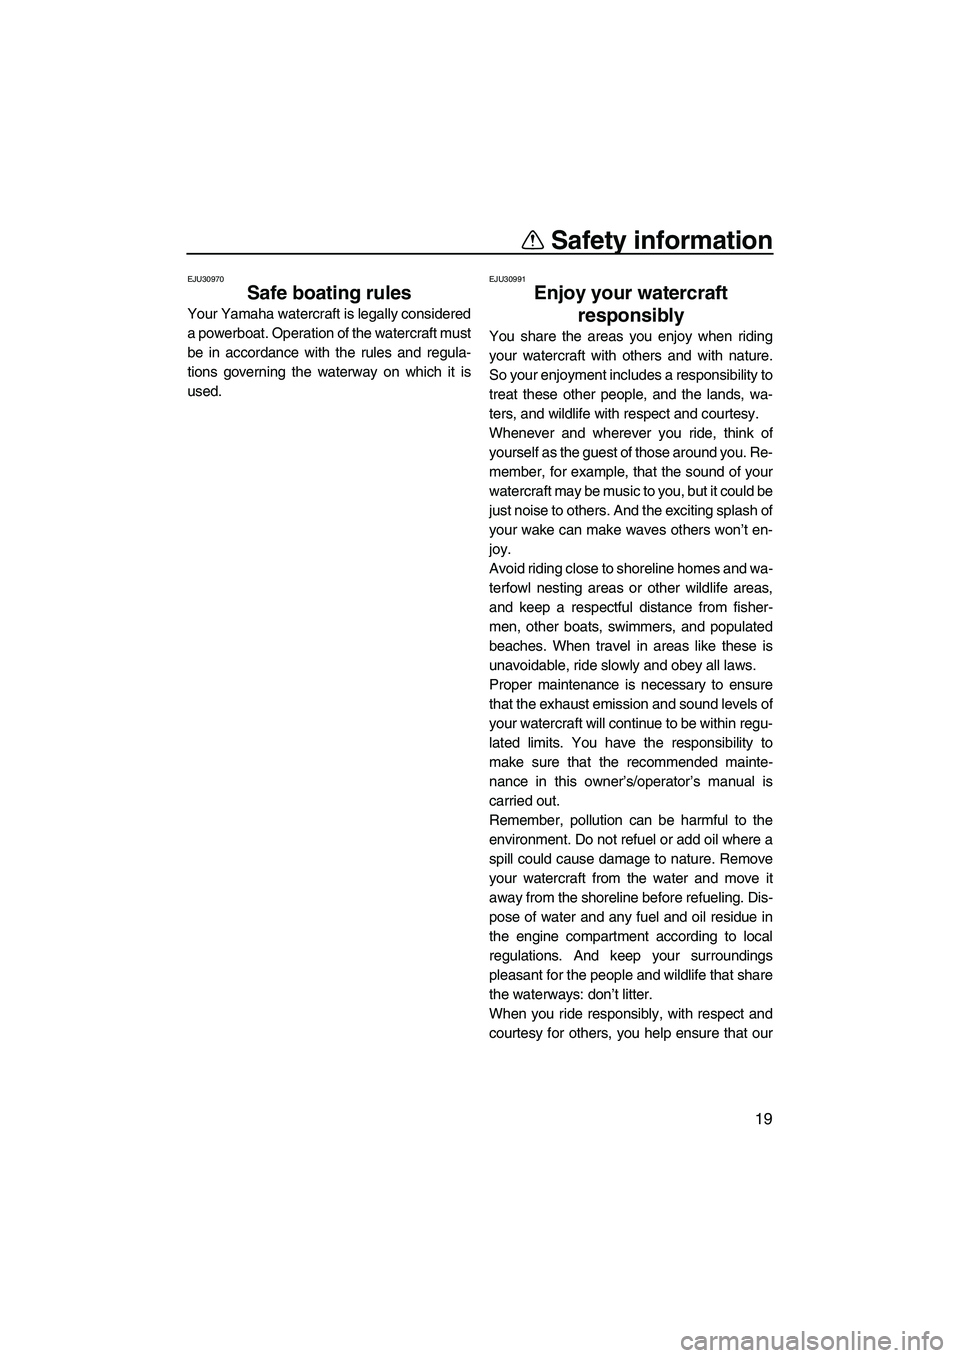 YAMAHA SVHO CRUISER 2011  Owners Manual Safety information
19
EJU30970
Safe boating rules 
Your Yamaha watercraft is legally considered
a powerboat. Operation of the watercraft must
be in accordance with the rules and regula-
tions governin